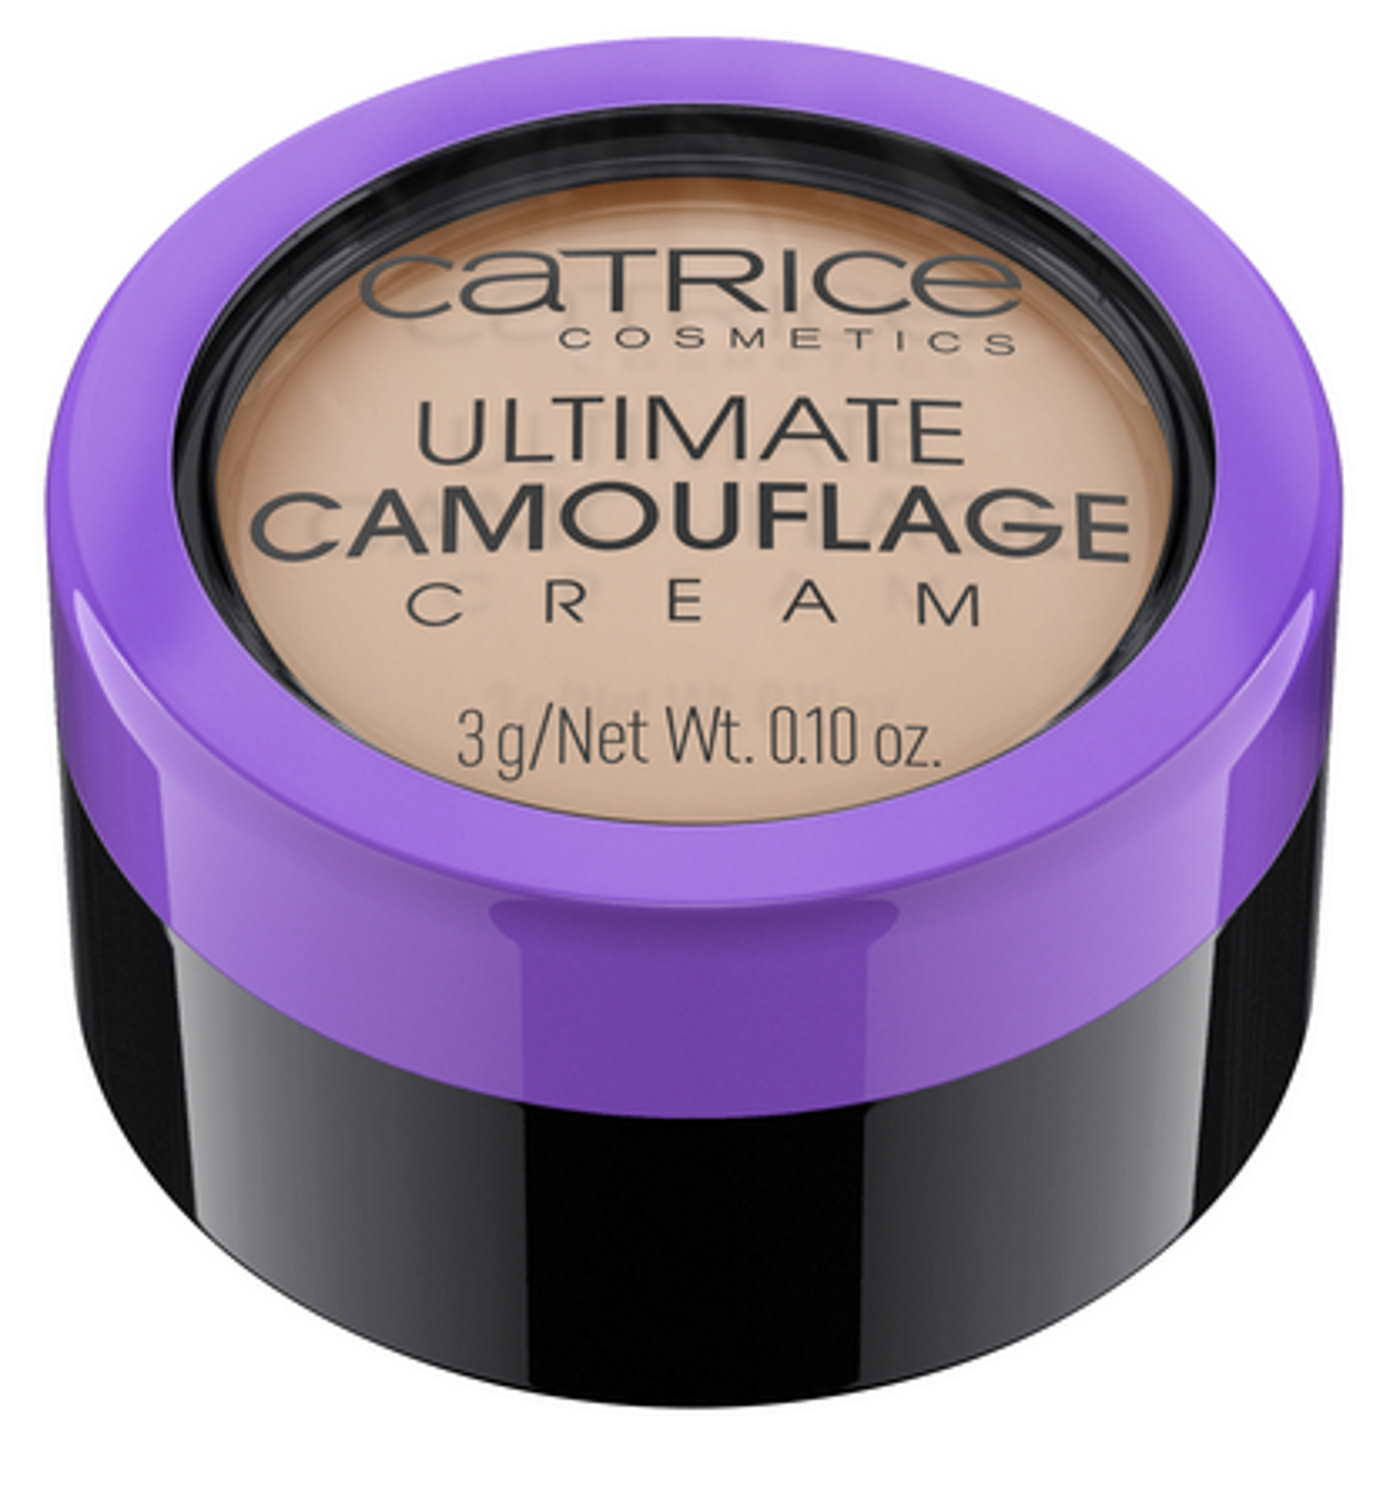 Catrice Ultimate Camouflage Cream 020 N Light Beige 3G (0.11oz)